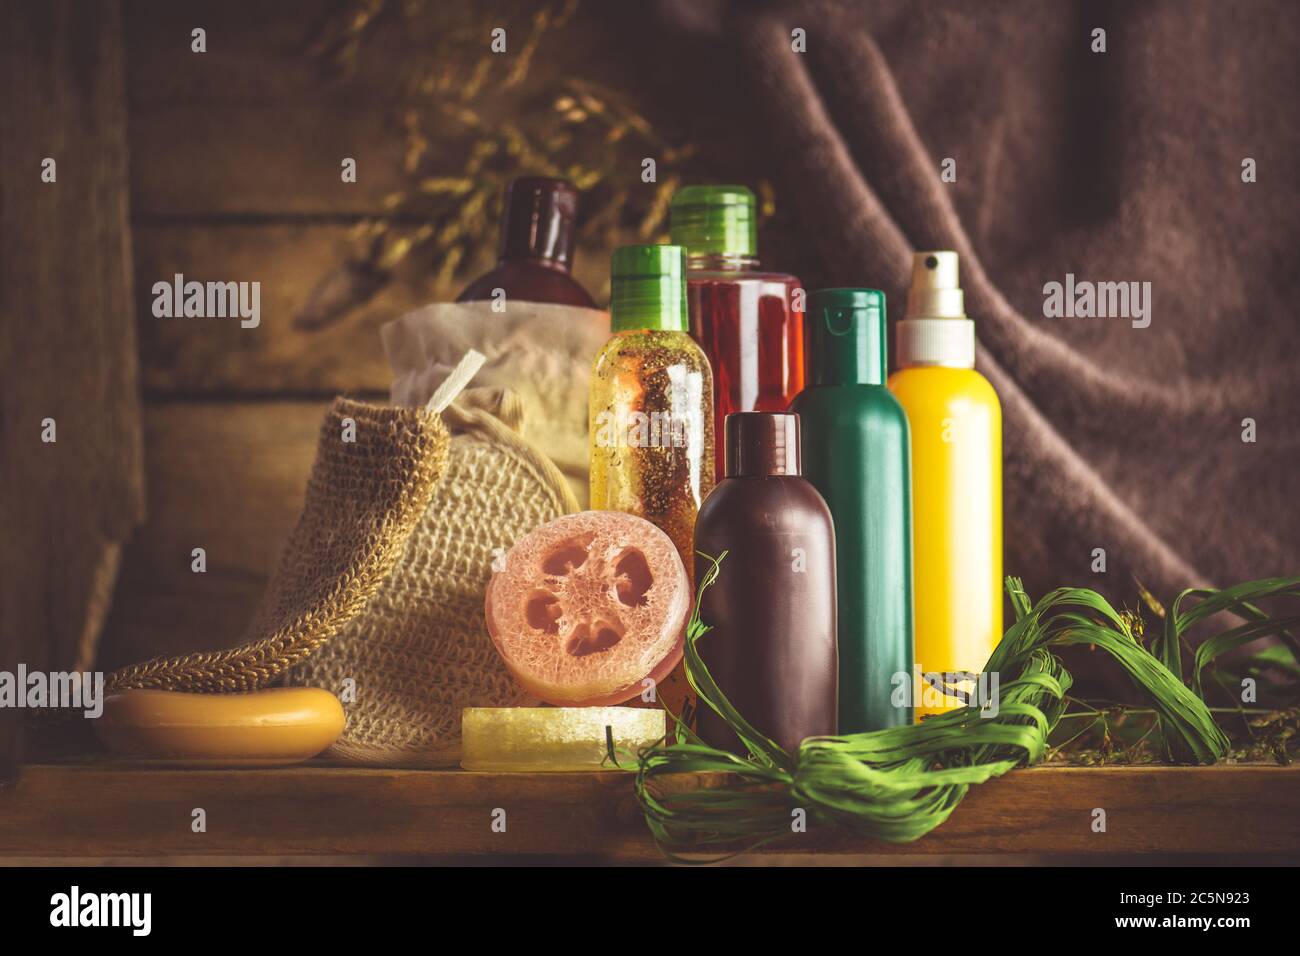 Body Bliss launches new aromatherapy app for customisable spa treatments -  spaopportunities.com news